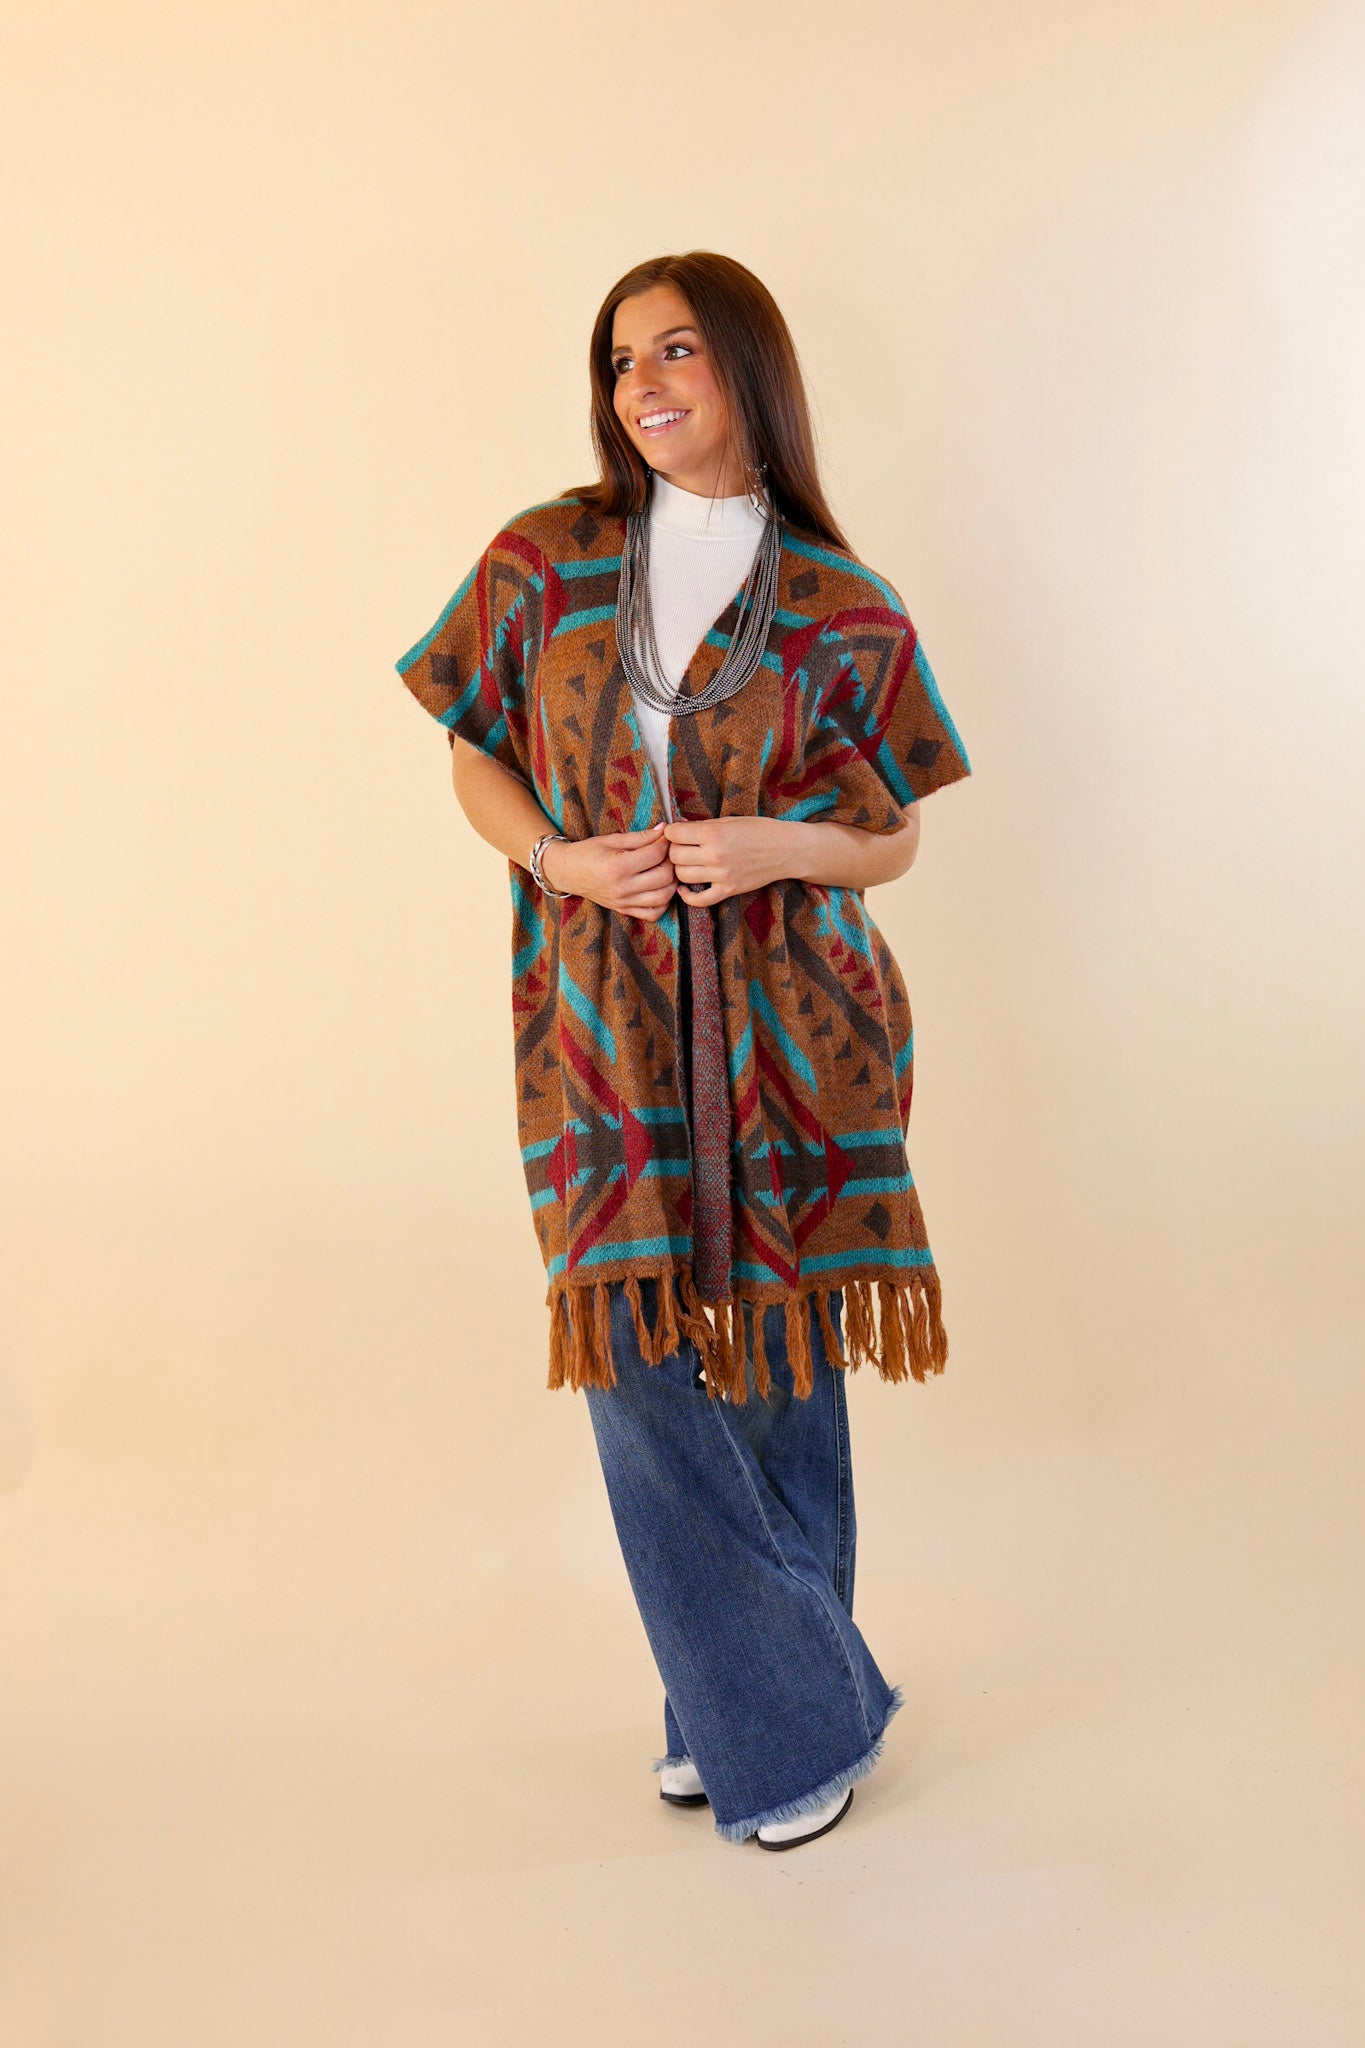 South Texas Sunset Aztec Print Wrap Poncho Vest in Turquoise and Camel - Giddy Up Glamour Boutique